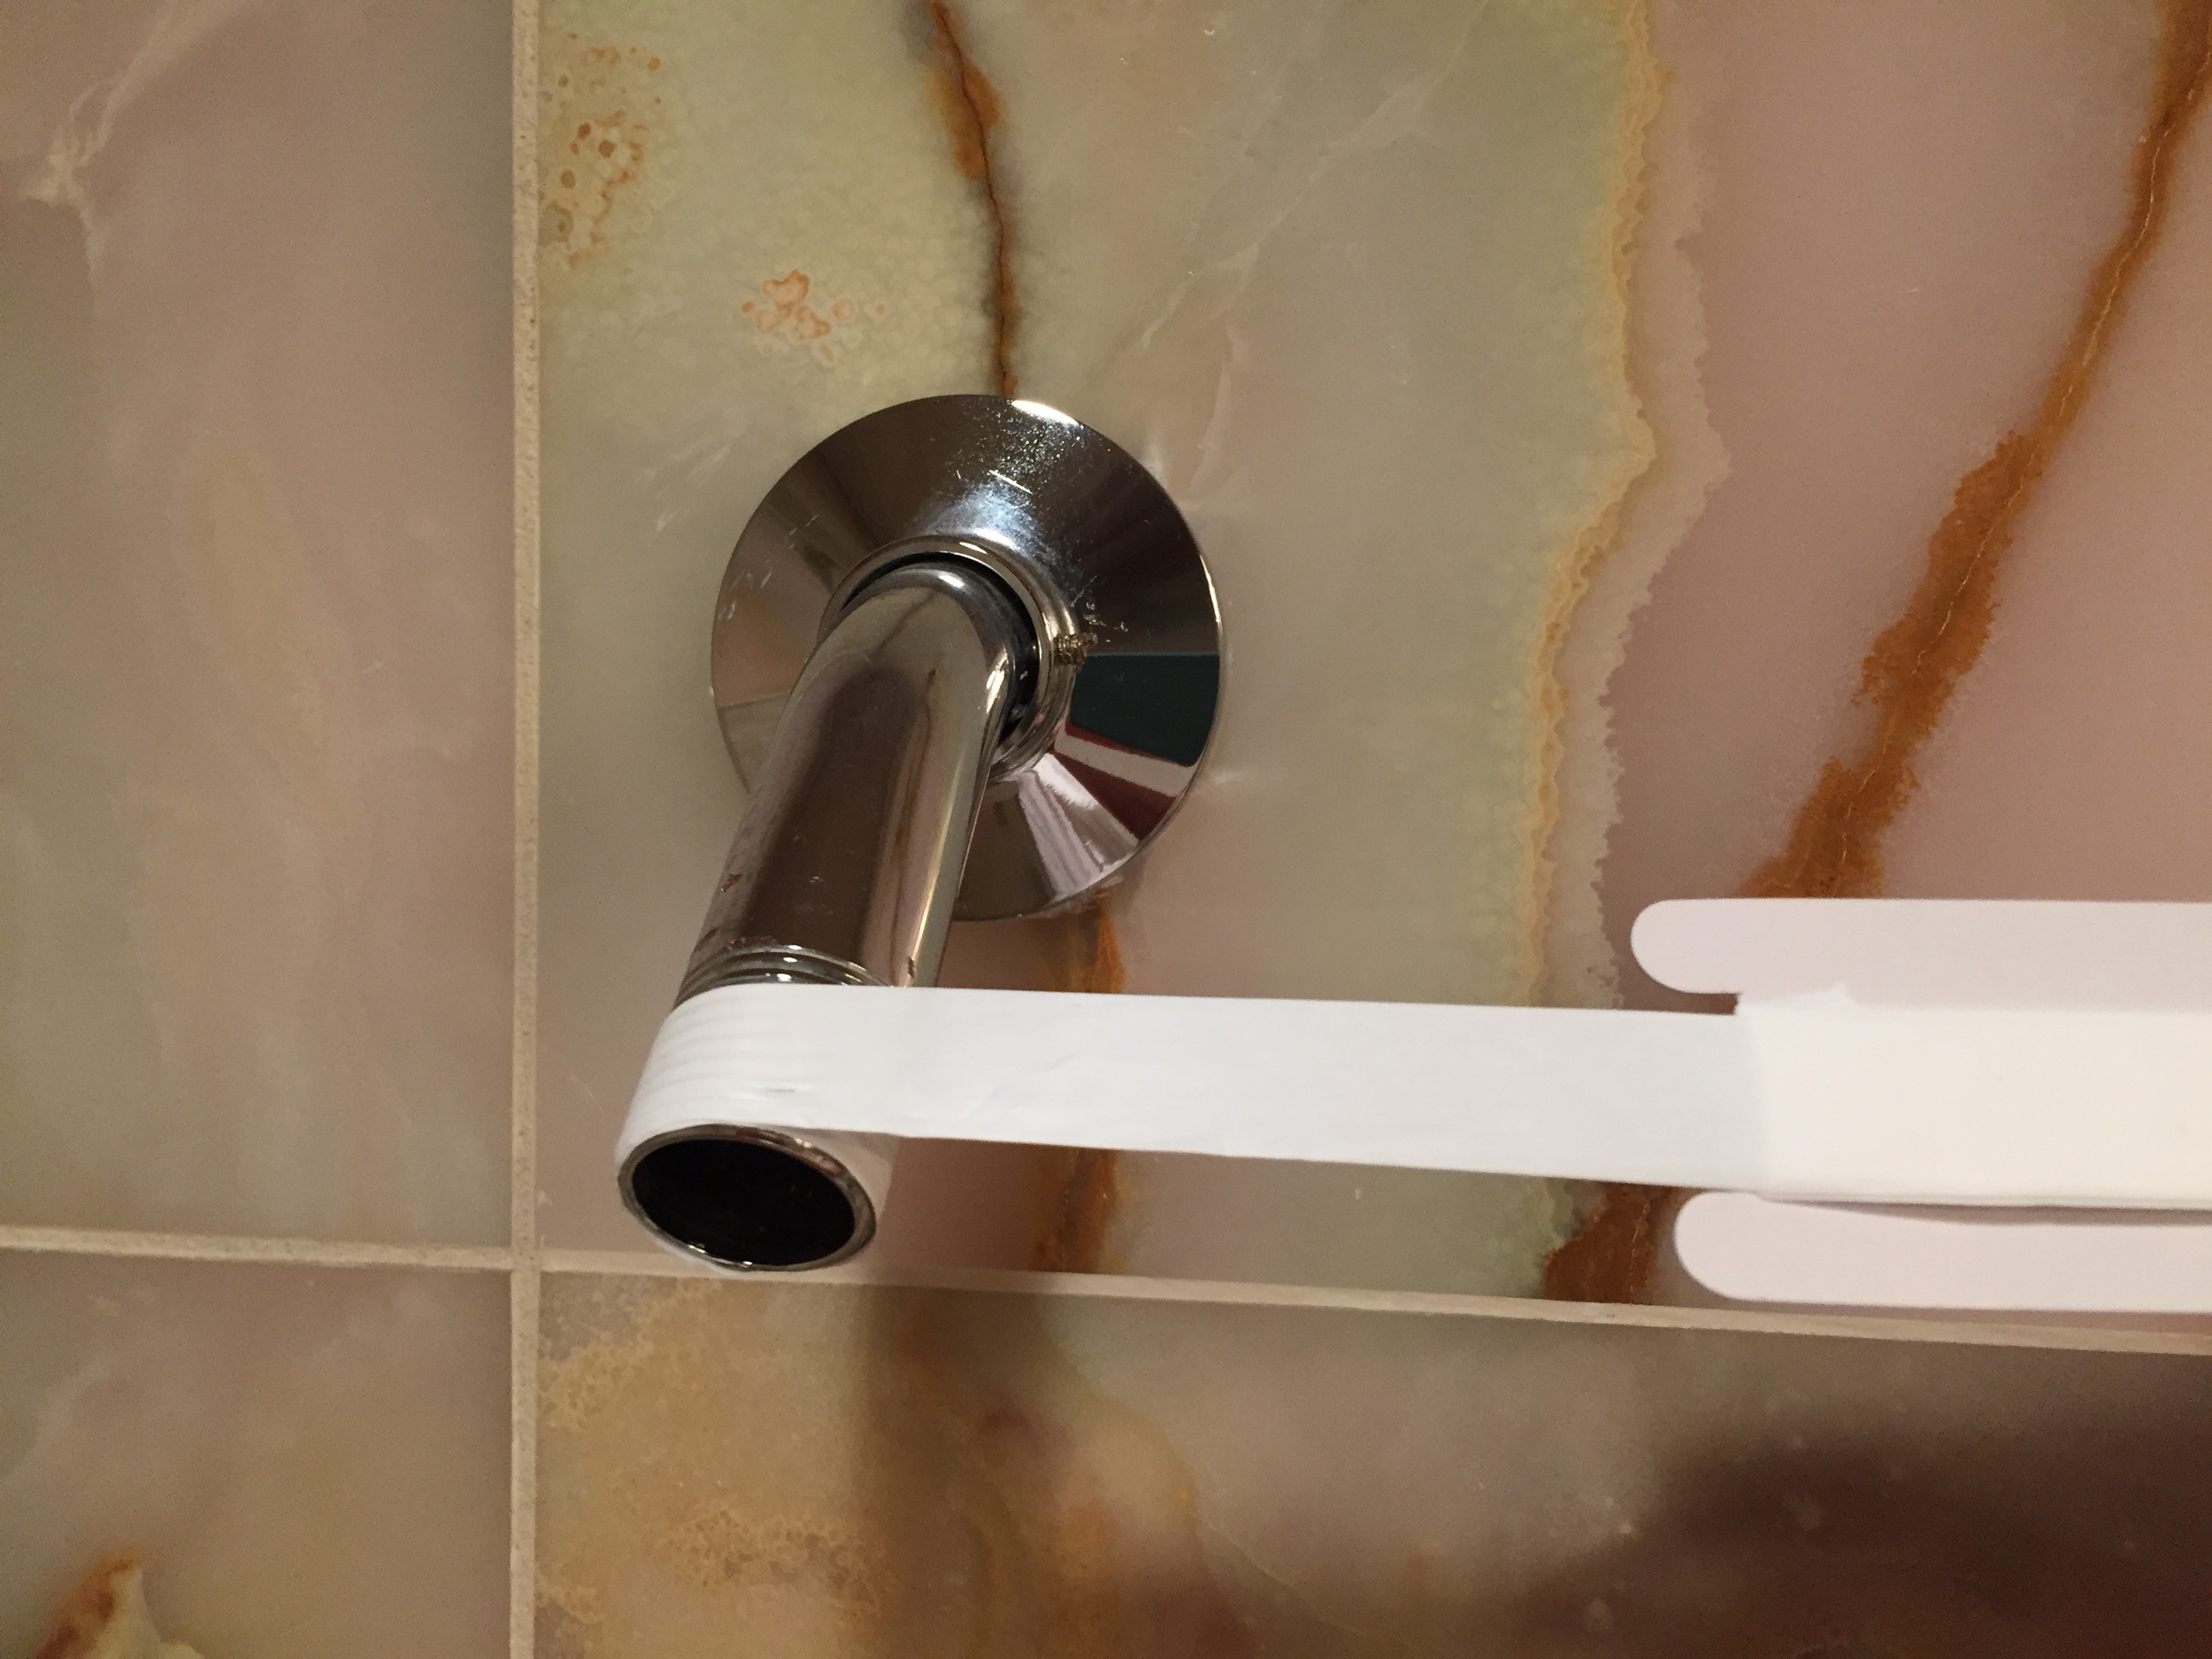 Wrap plumber's tape (thread seal tape) around the shower arm to create a watertight seal